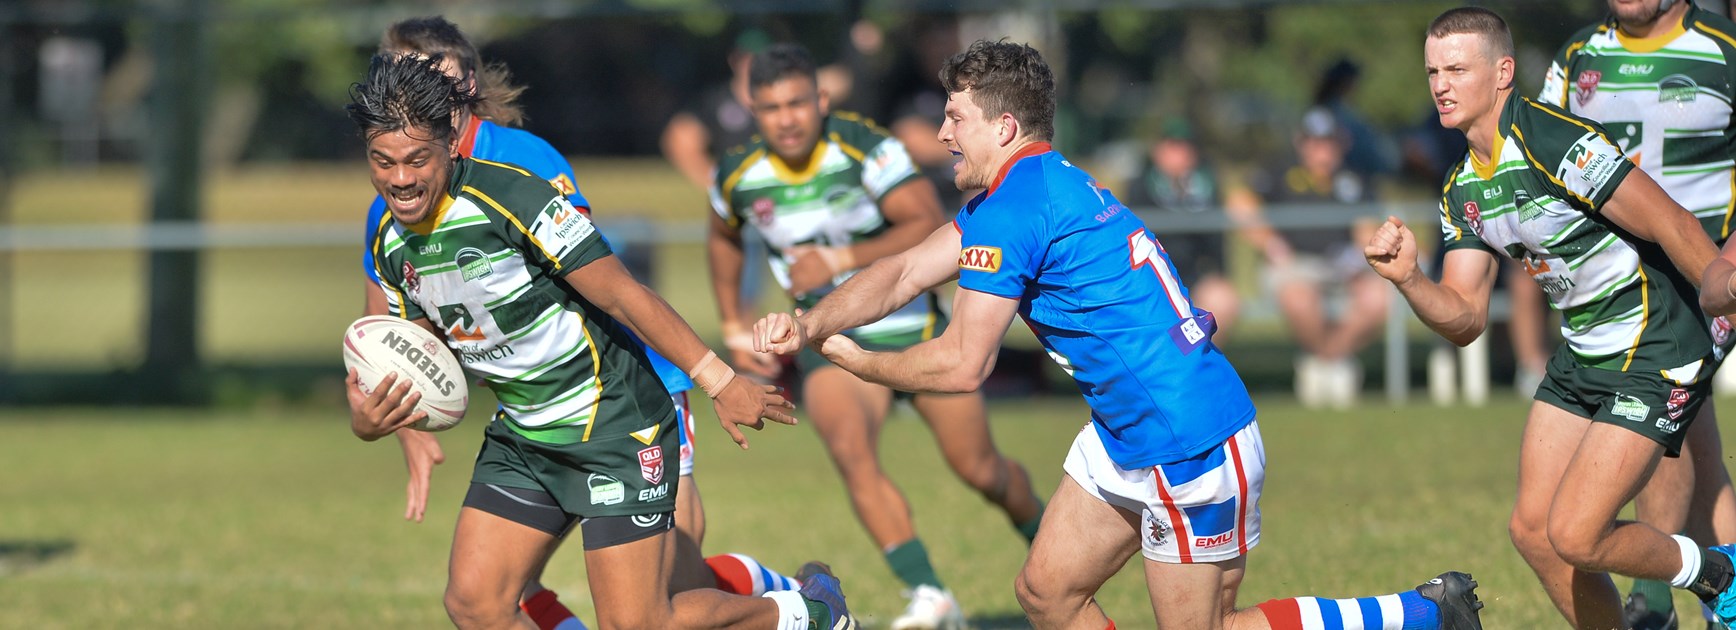 Rugby League Ipswich announce Diggers squads